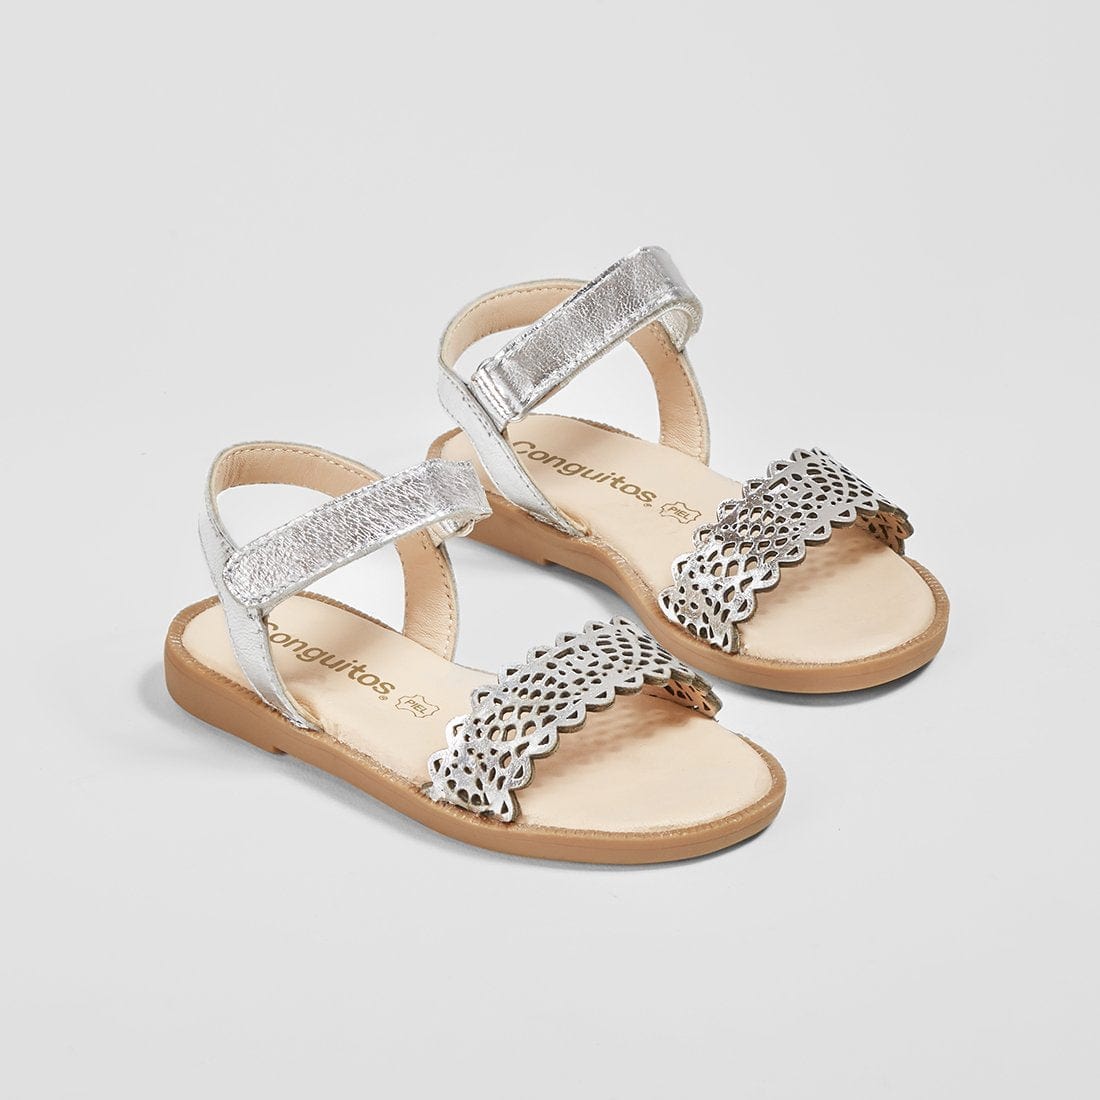 CONGUITOS Shoes Girl's Silver Leather Sandals